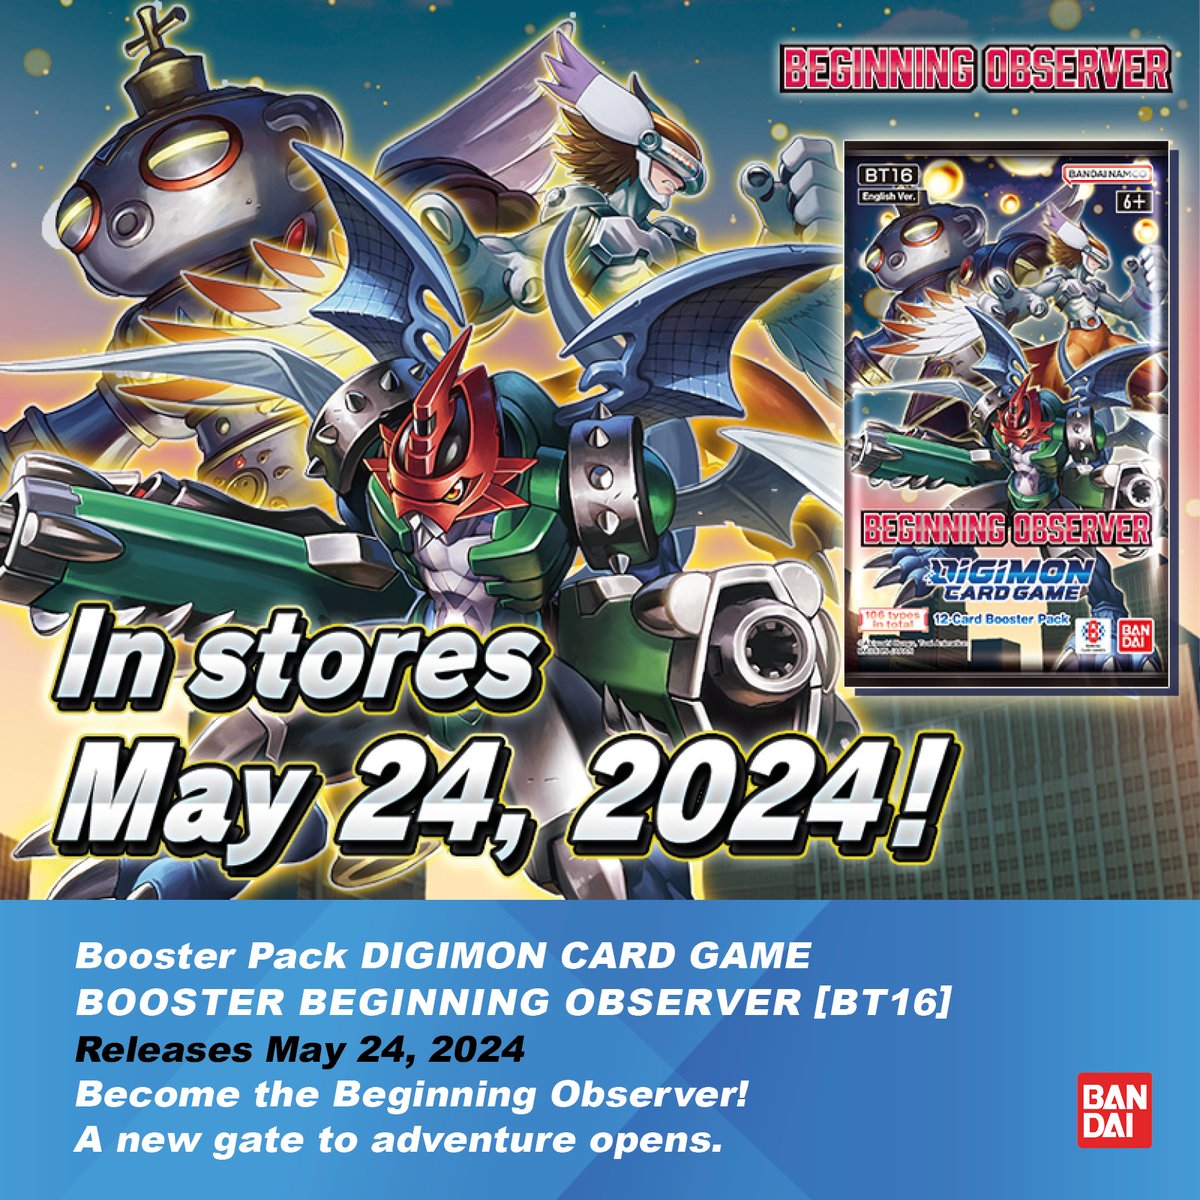 [BEGINNING OBSERVER [BT16] Release]

Hello Digimon Tamers!
Become the Beginning Observer! A new gate to adventure opens.
BEGINNING OBSERVER [BT16] out May 24, 2024!
world.digimoncard.com/products/pack/…

#DigimonCardGame
#DigimonTCG
#Digimon